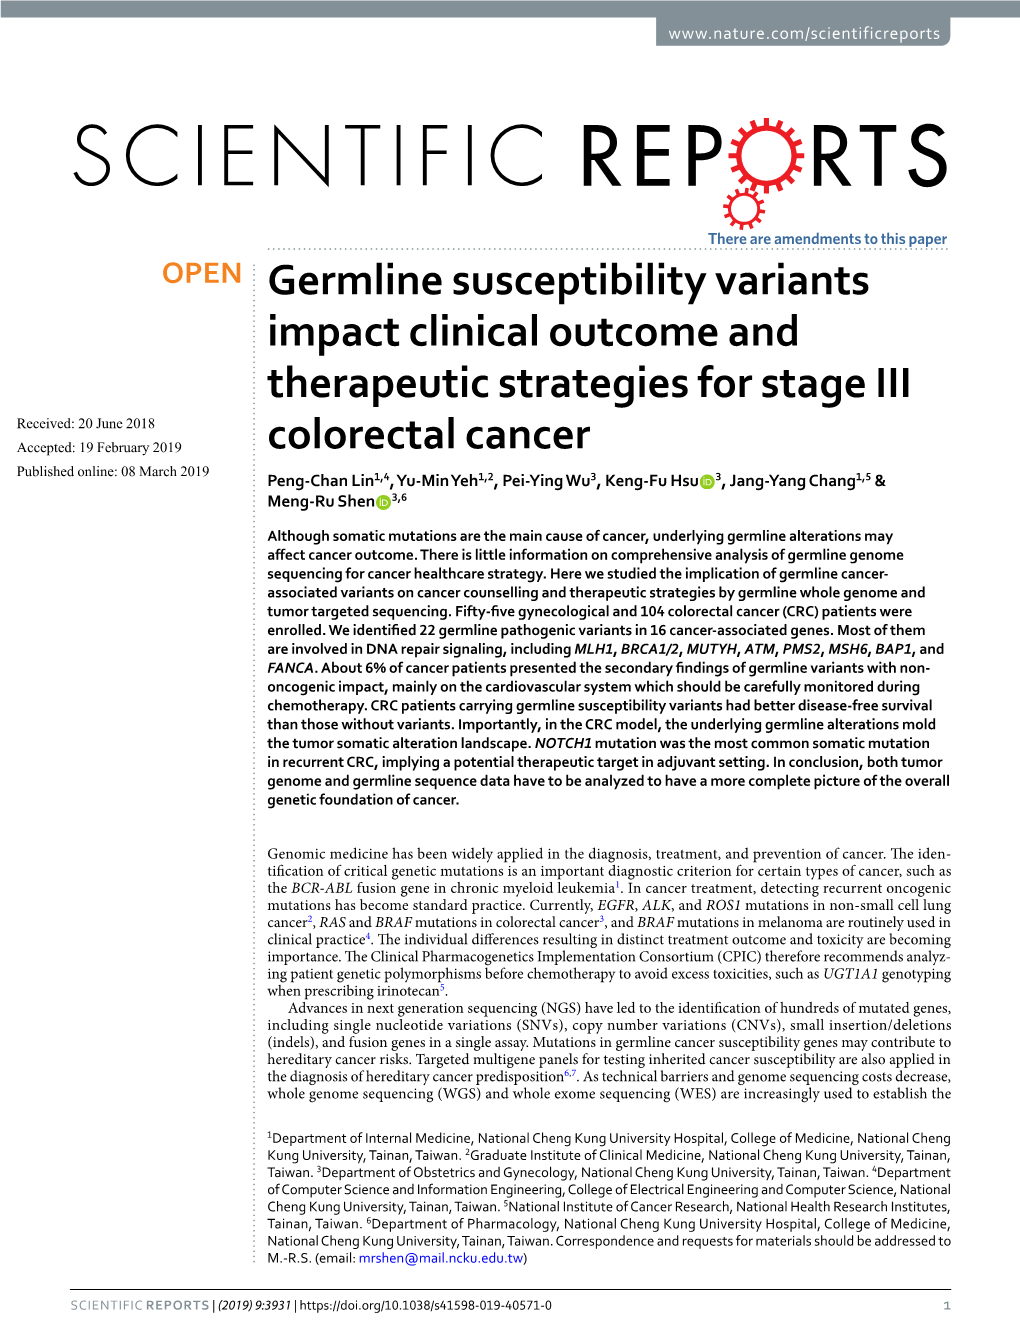 Germline Susceptibility Variants Impact Clinical Outcome and Therapeutic